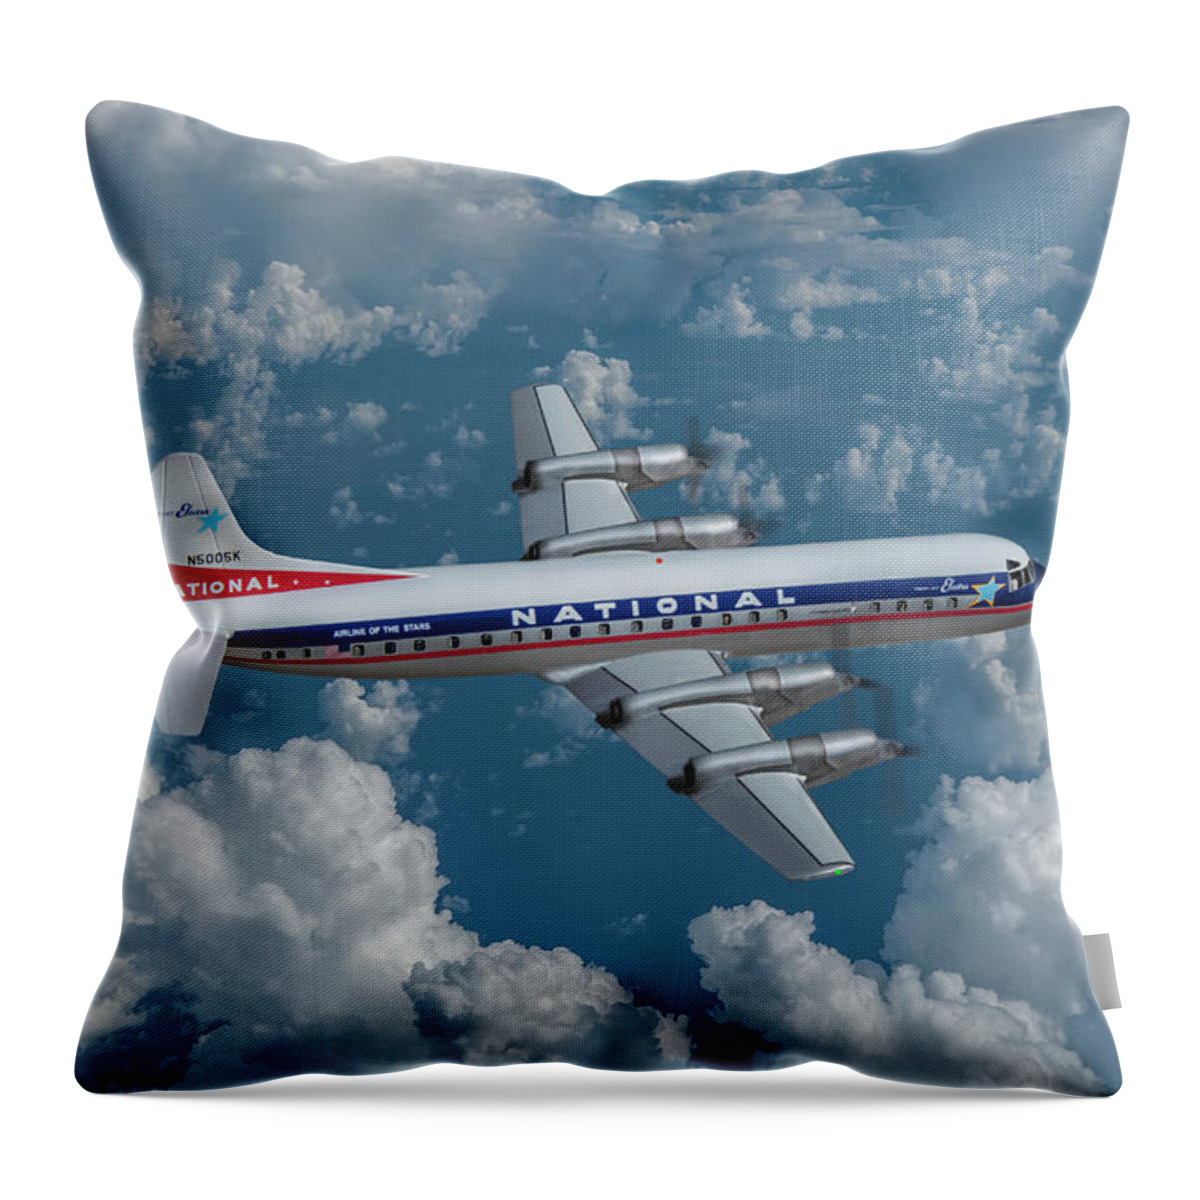 National Airlines Throw Pillow featuring the digital art National Airlines Lockheed Electra by Erik Simonsen